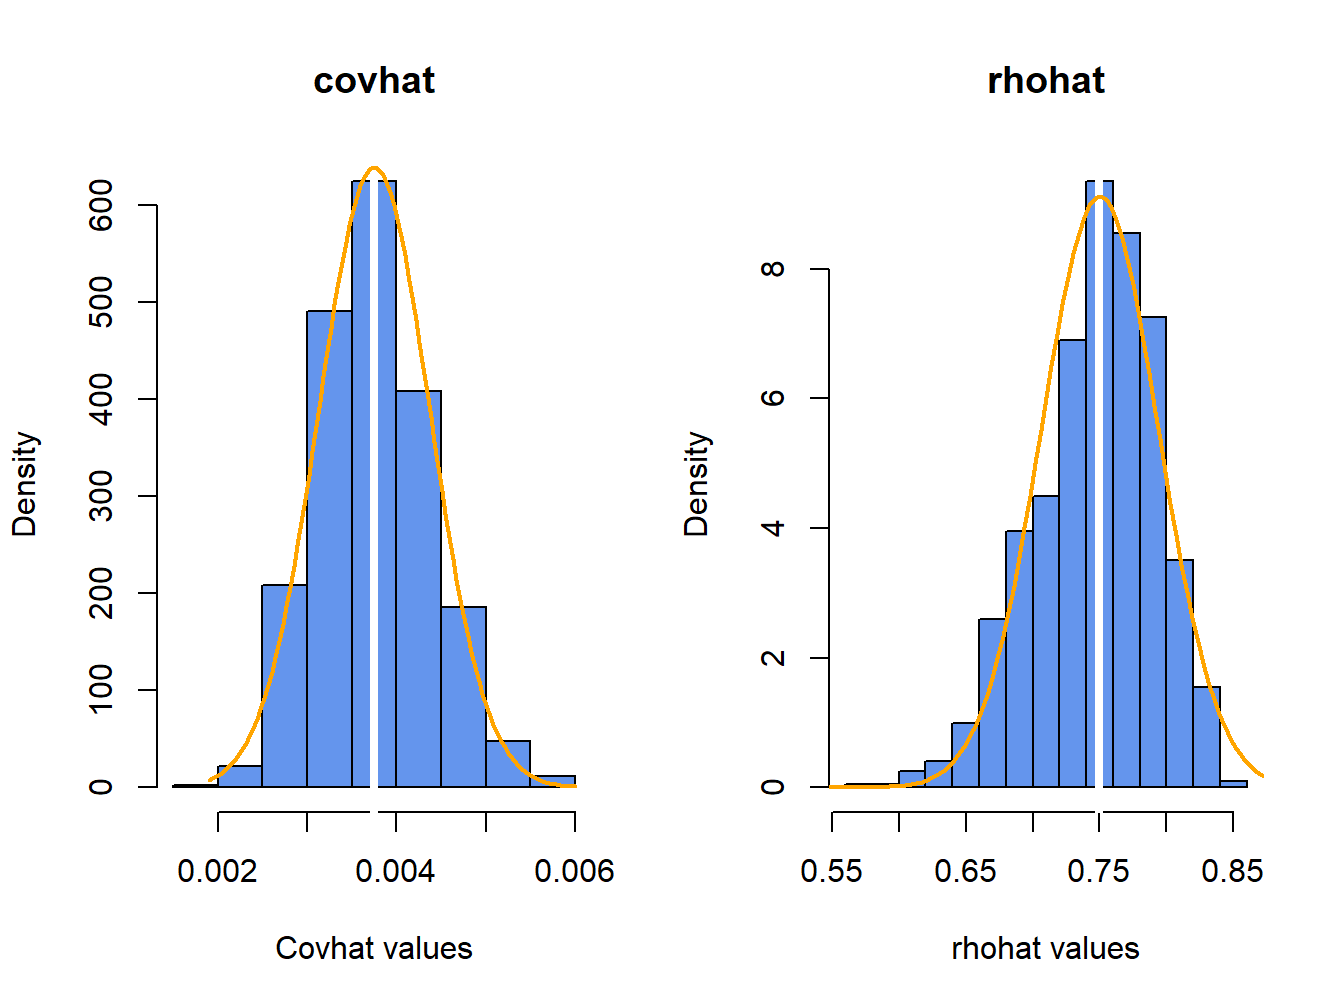 Histograms of $\hat{\rho}_{12}$ computed from $N=1000$ Monte Carlo samples from the bivariate GWN model \@ref(eq:bivariate-GWN-model-1) - \@ref(eq:bivariate-GWN-model-2).